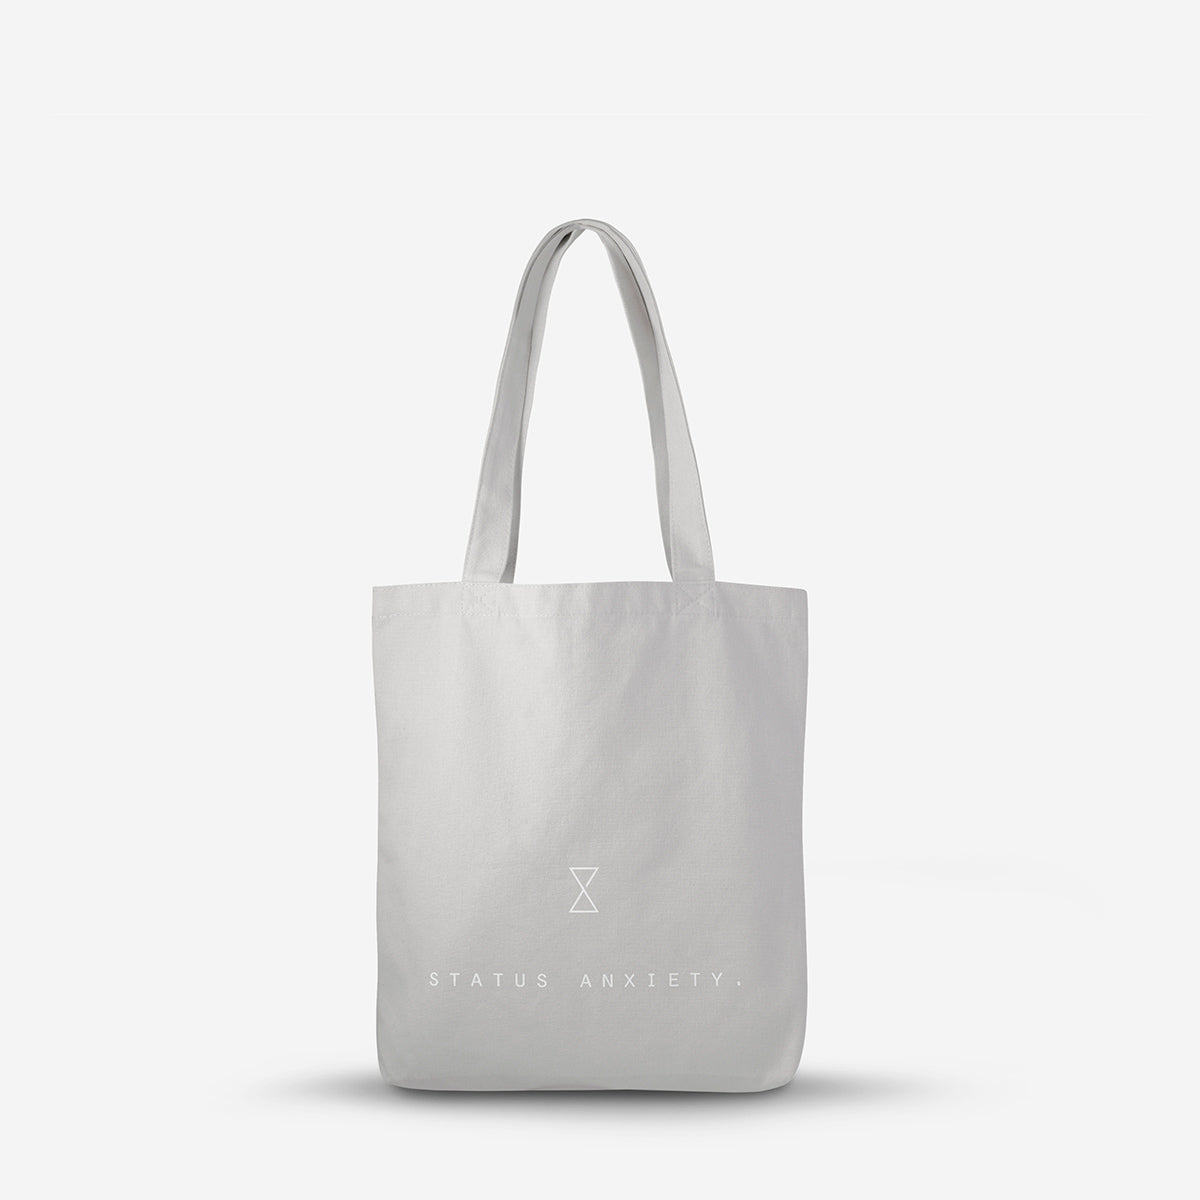 Status Anxiety First Glance Canvas Tote Bag Light grey